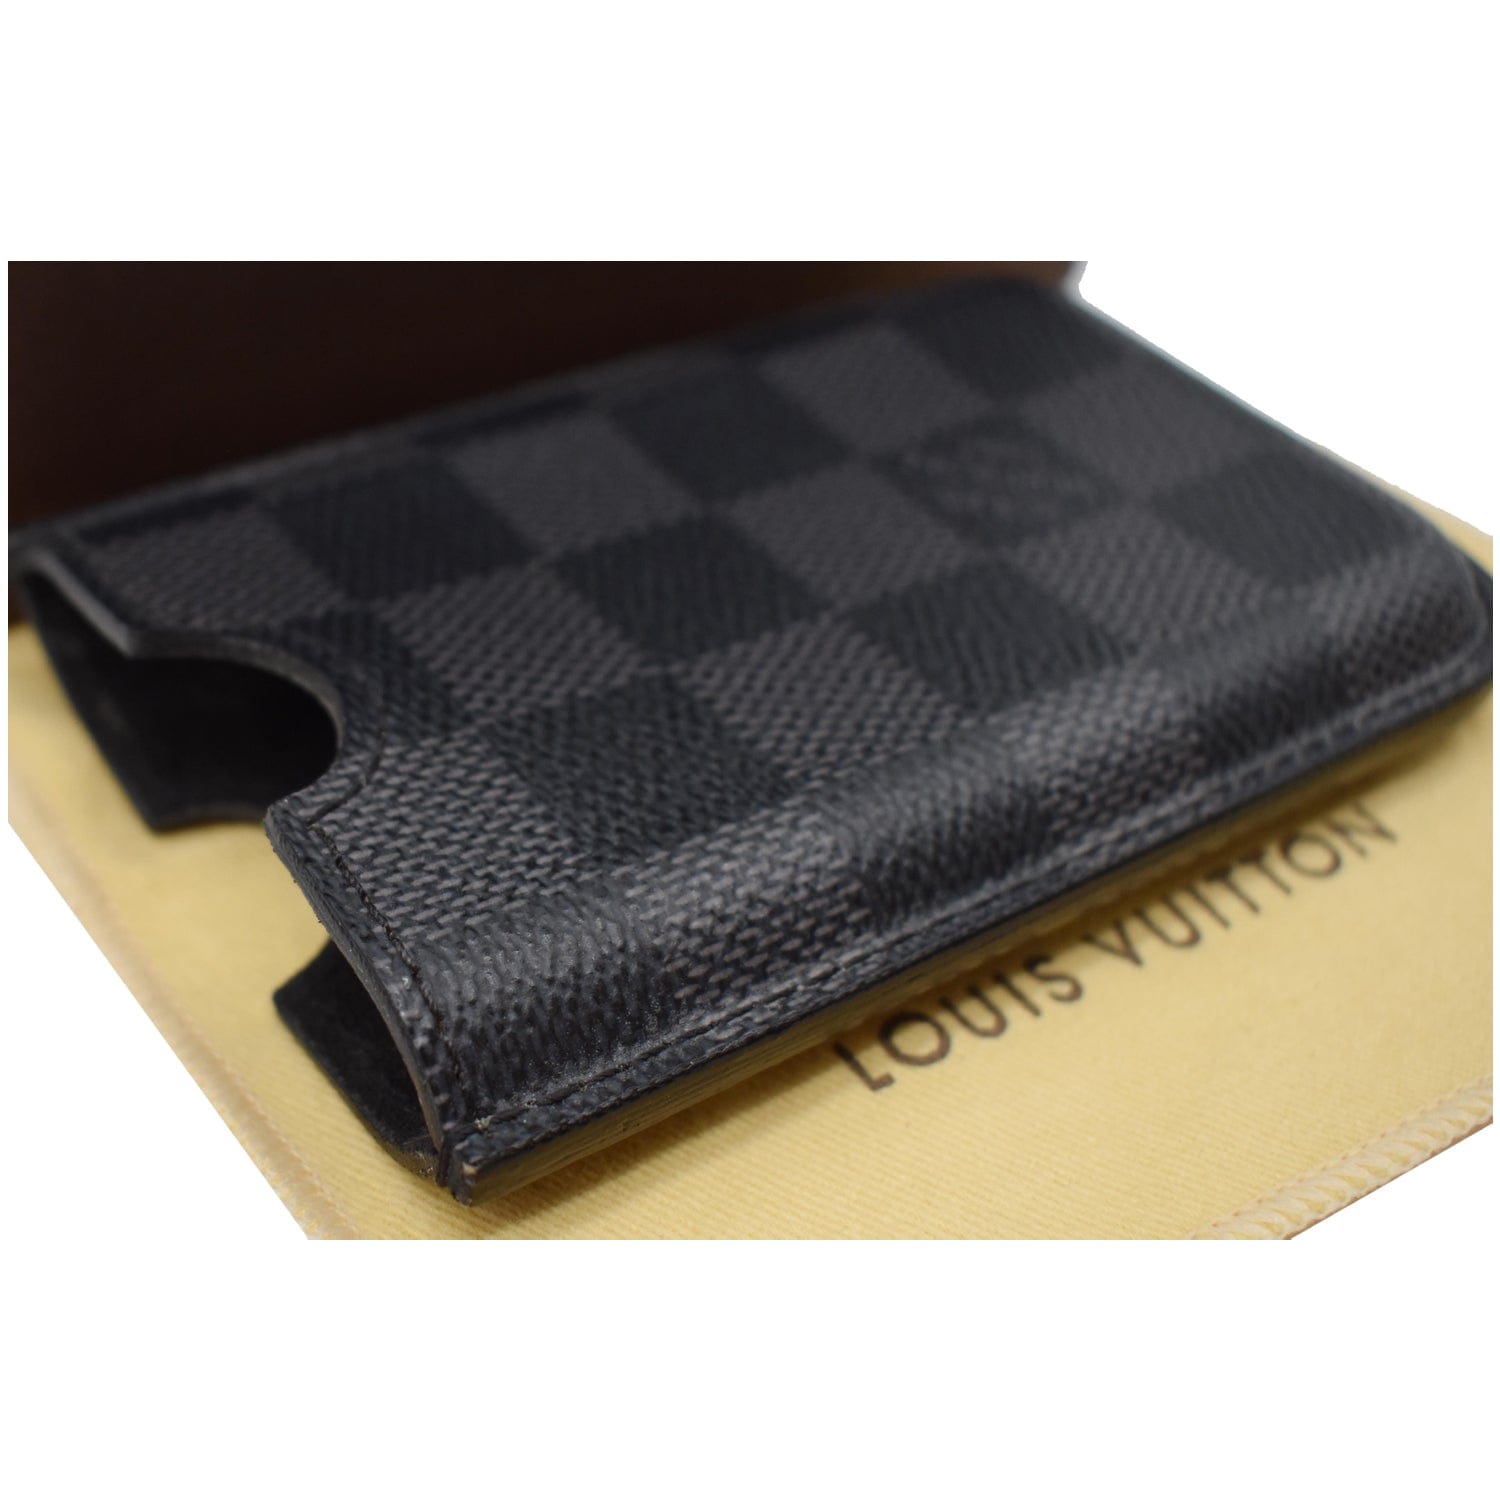 Louis Vuitton Damier Perforated Leather iPhone 5 Mobile Etui